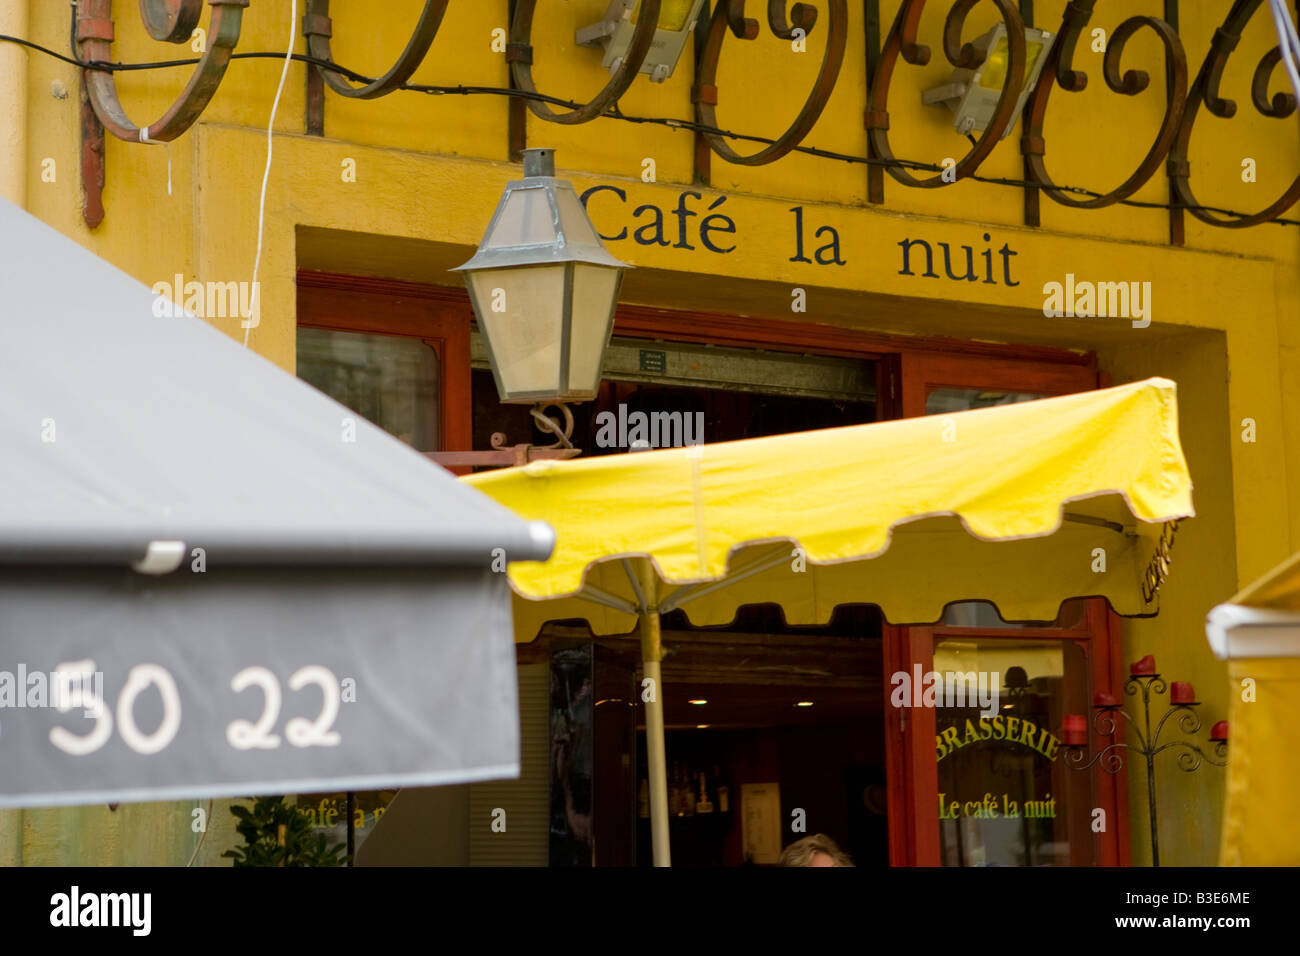 The Cafe La Nuit made famous in a Van Gough painting in Arles France Stock Photo